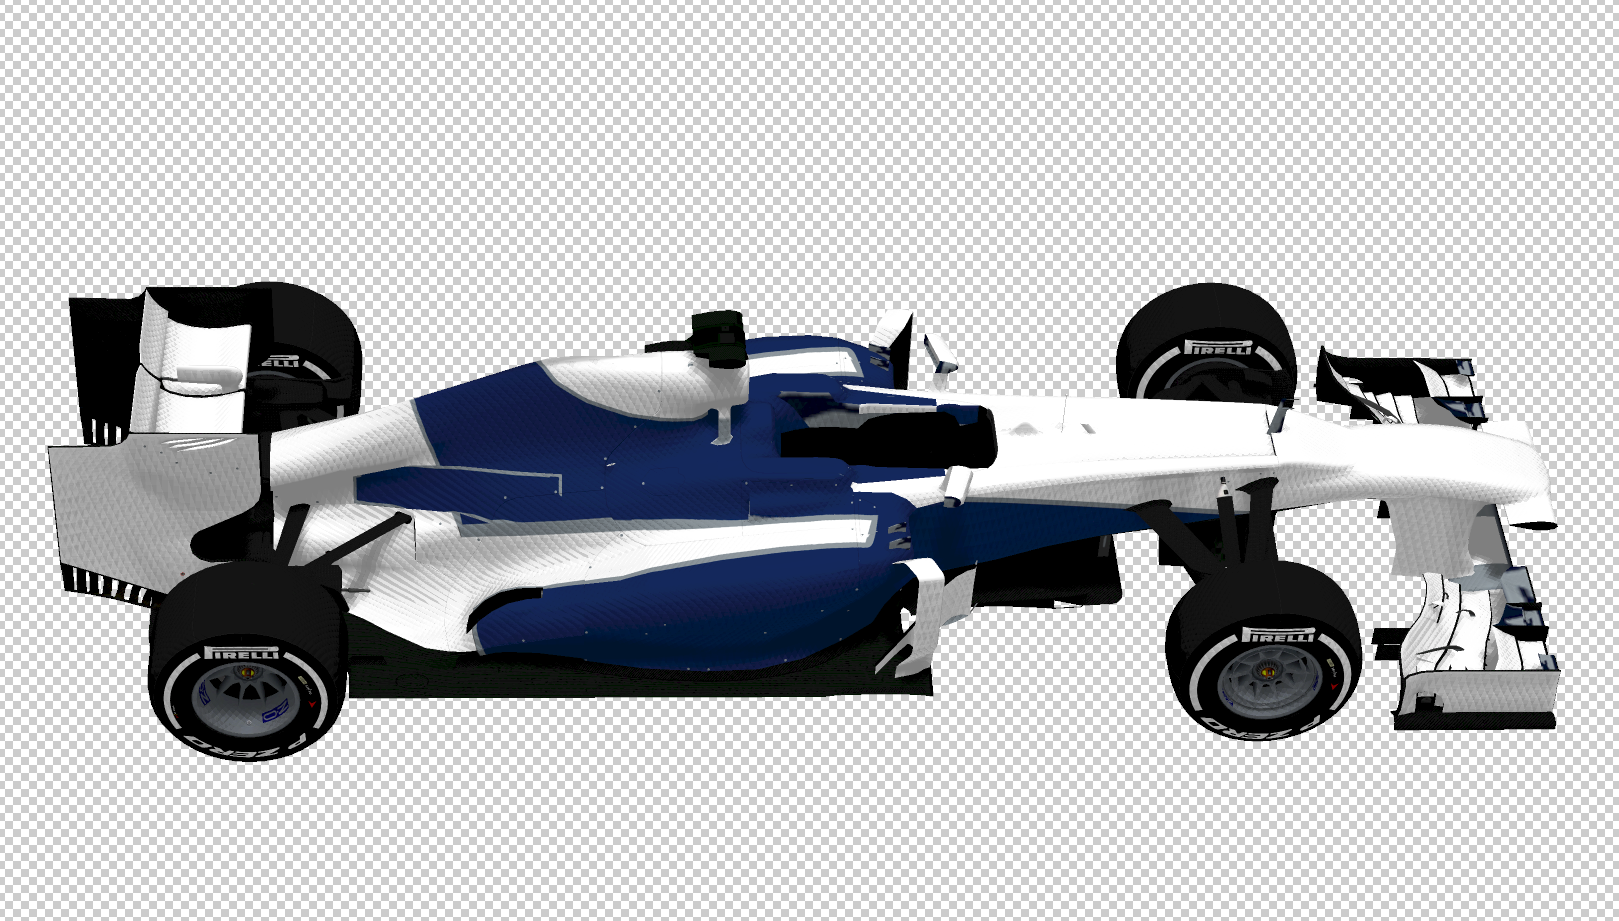 2001 Williams for F1 2013 &2014.PNG